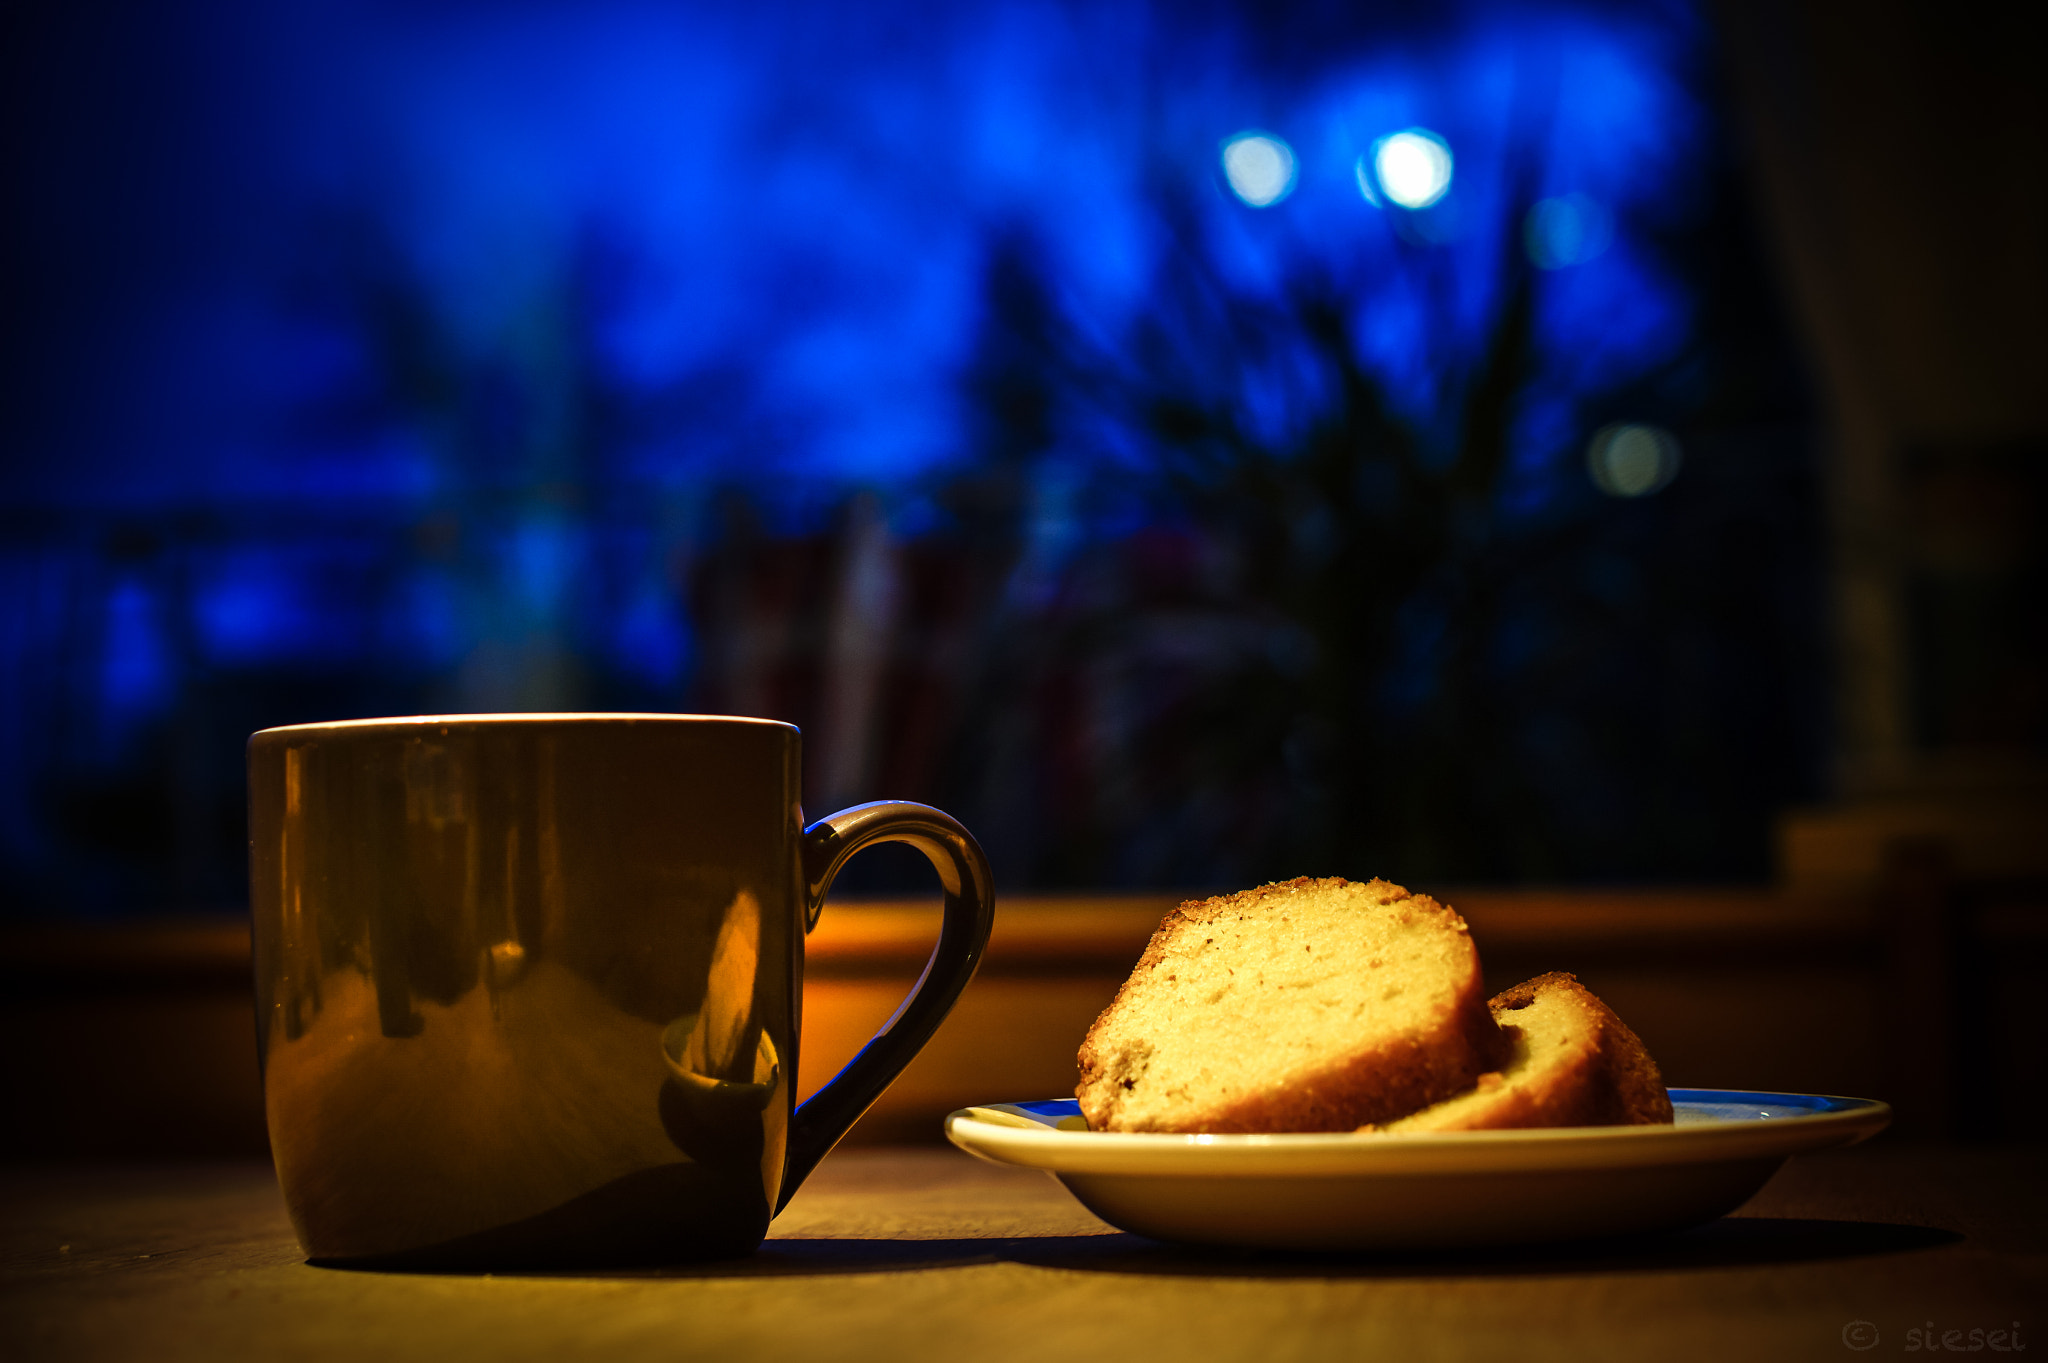 Sony SLT-A58 sample photo. Coffe and cake made by my wife photography